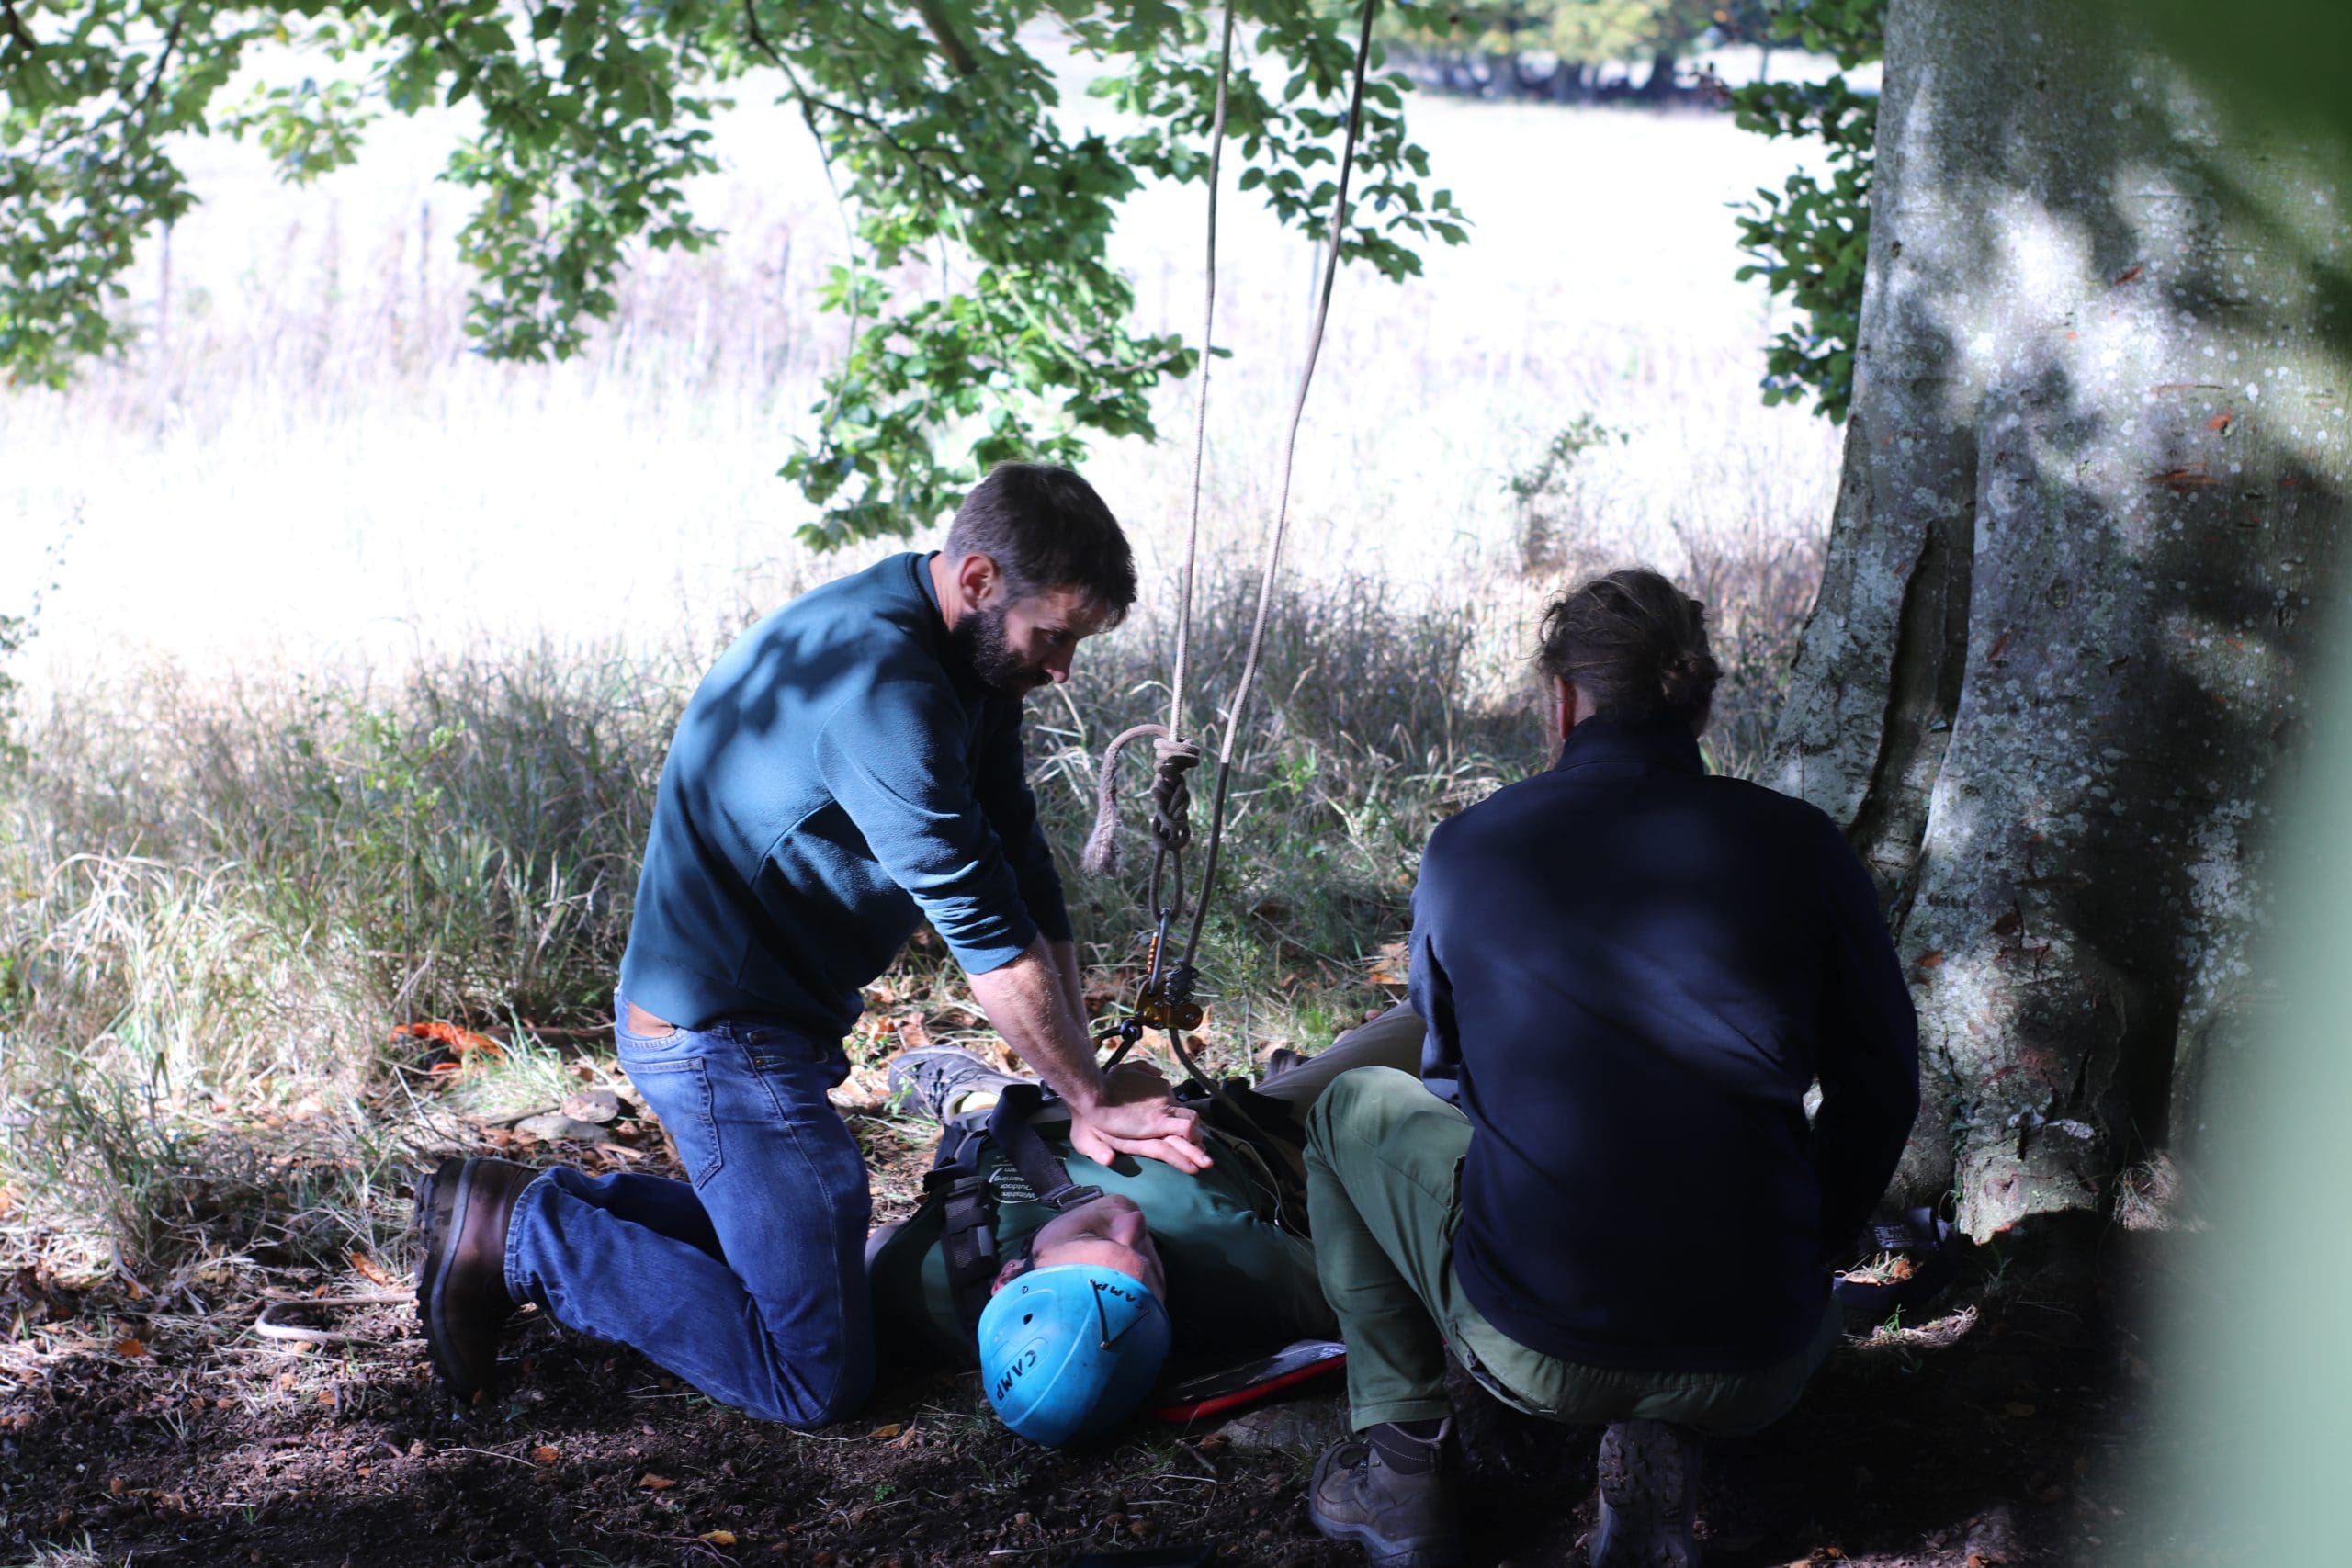 Two arborists applying first aid to a casualty